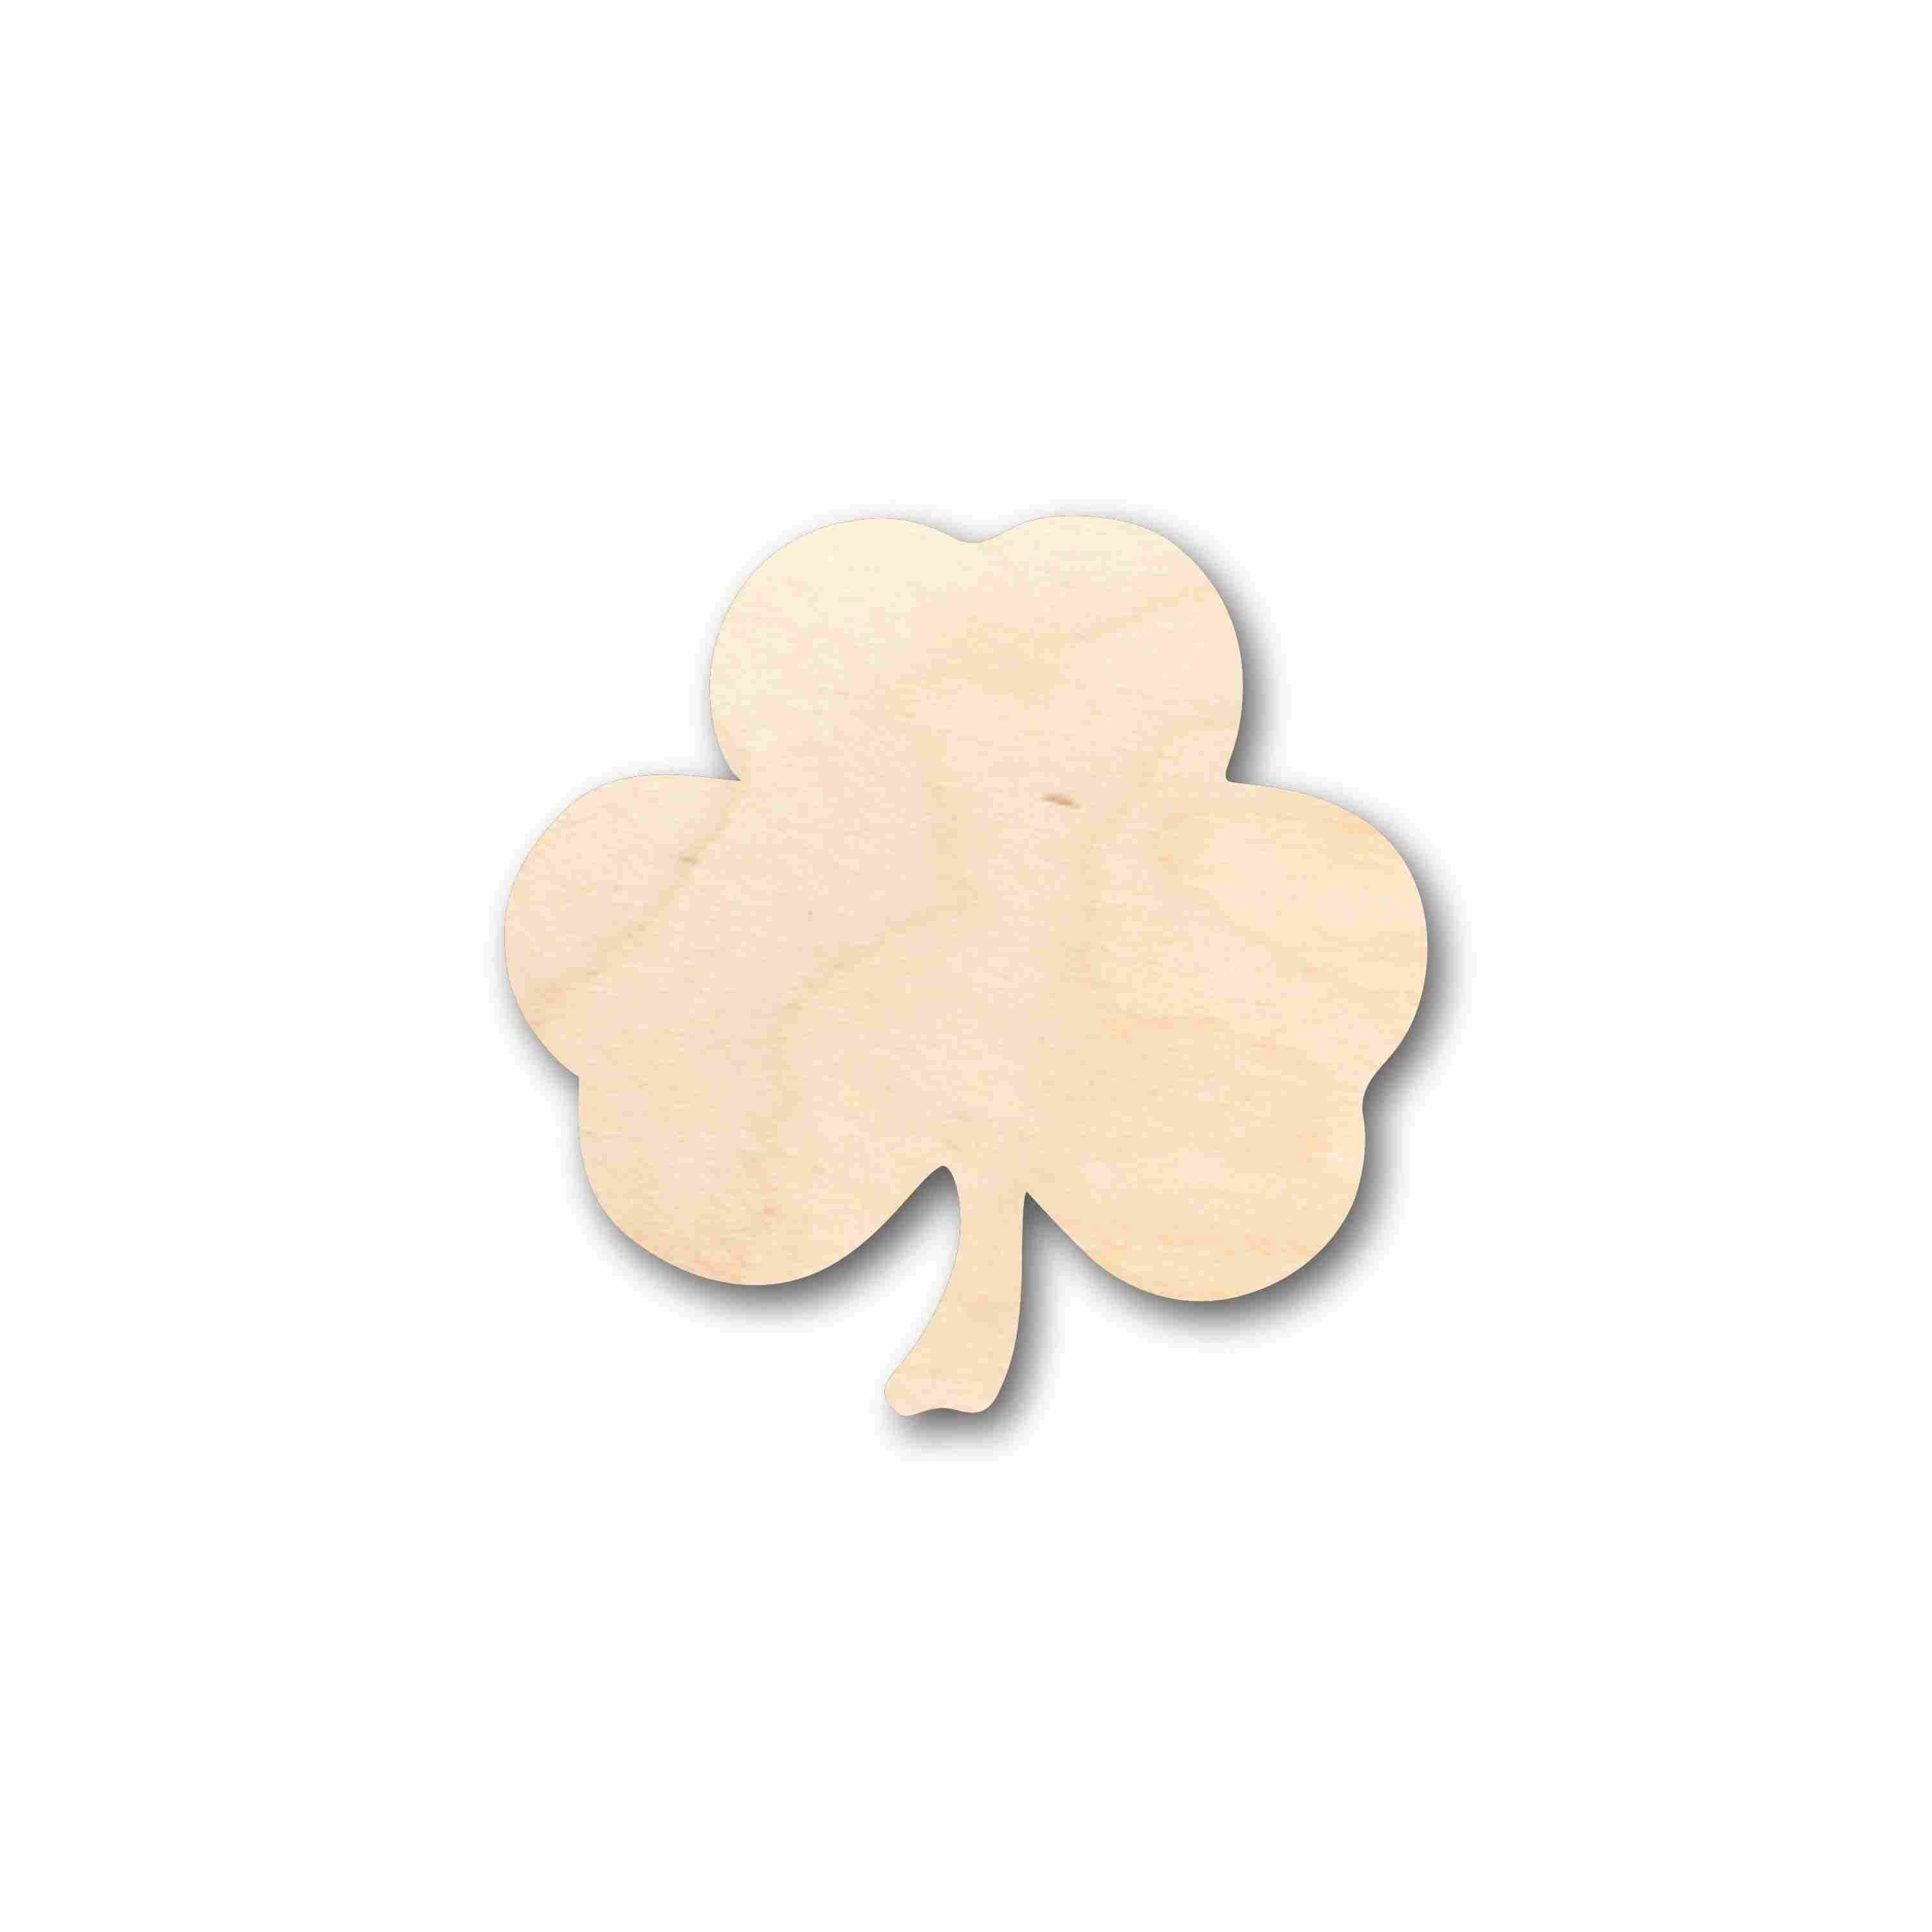 Unfinished Wood 3 Leaf Clover Silhouette - Craft- up to 24